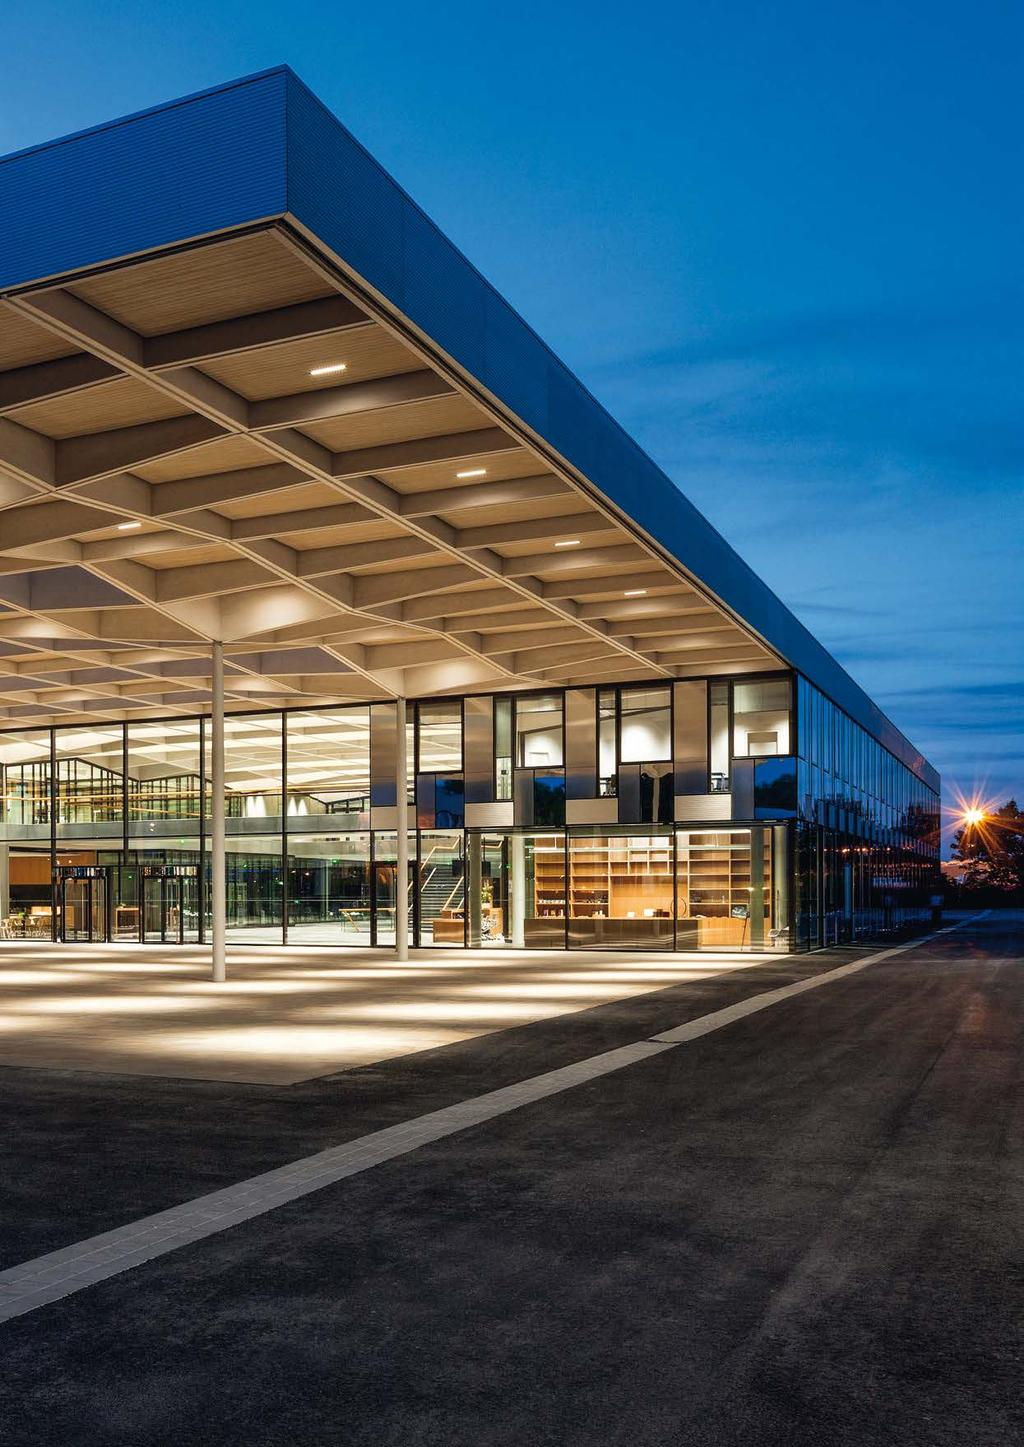 Hager Forum in Obernai, France, is a place where we can work with customers and partners to shape the future. That makes it a perfect symbol of the innovative power of Hager Group.